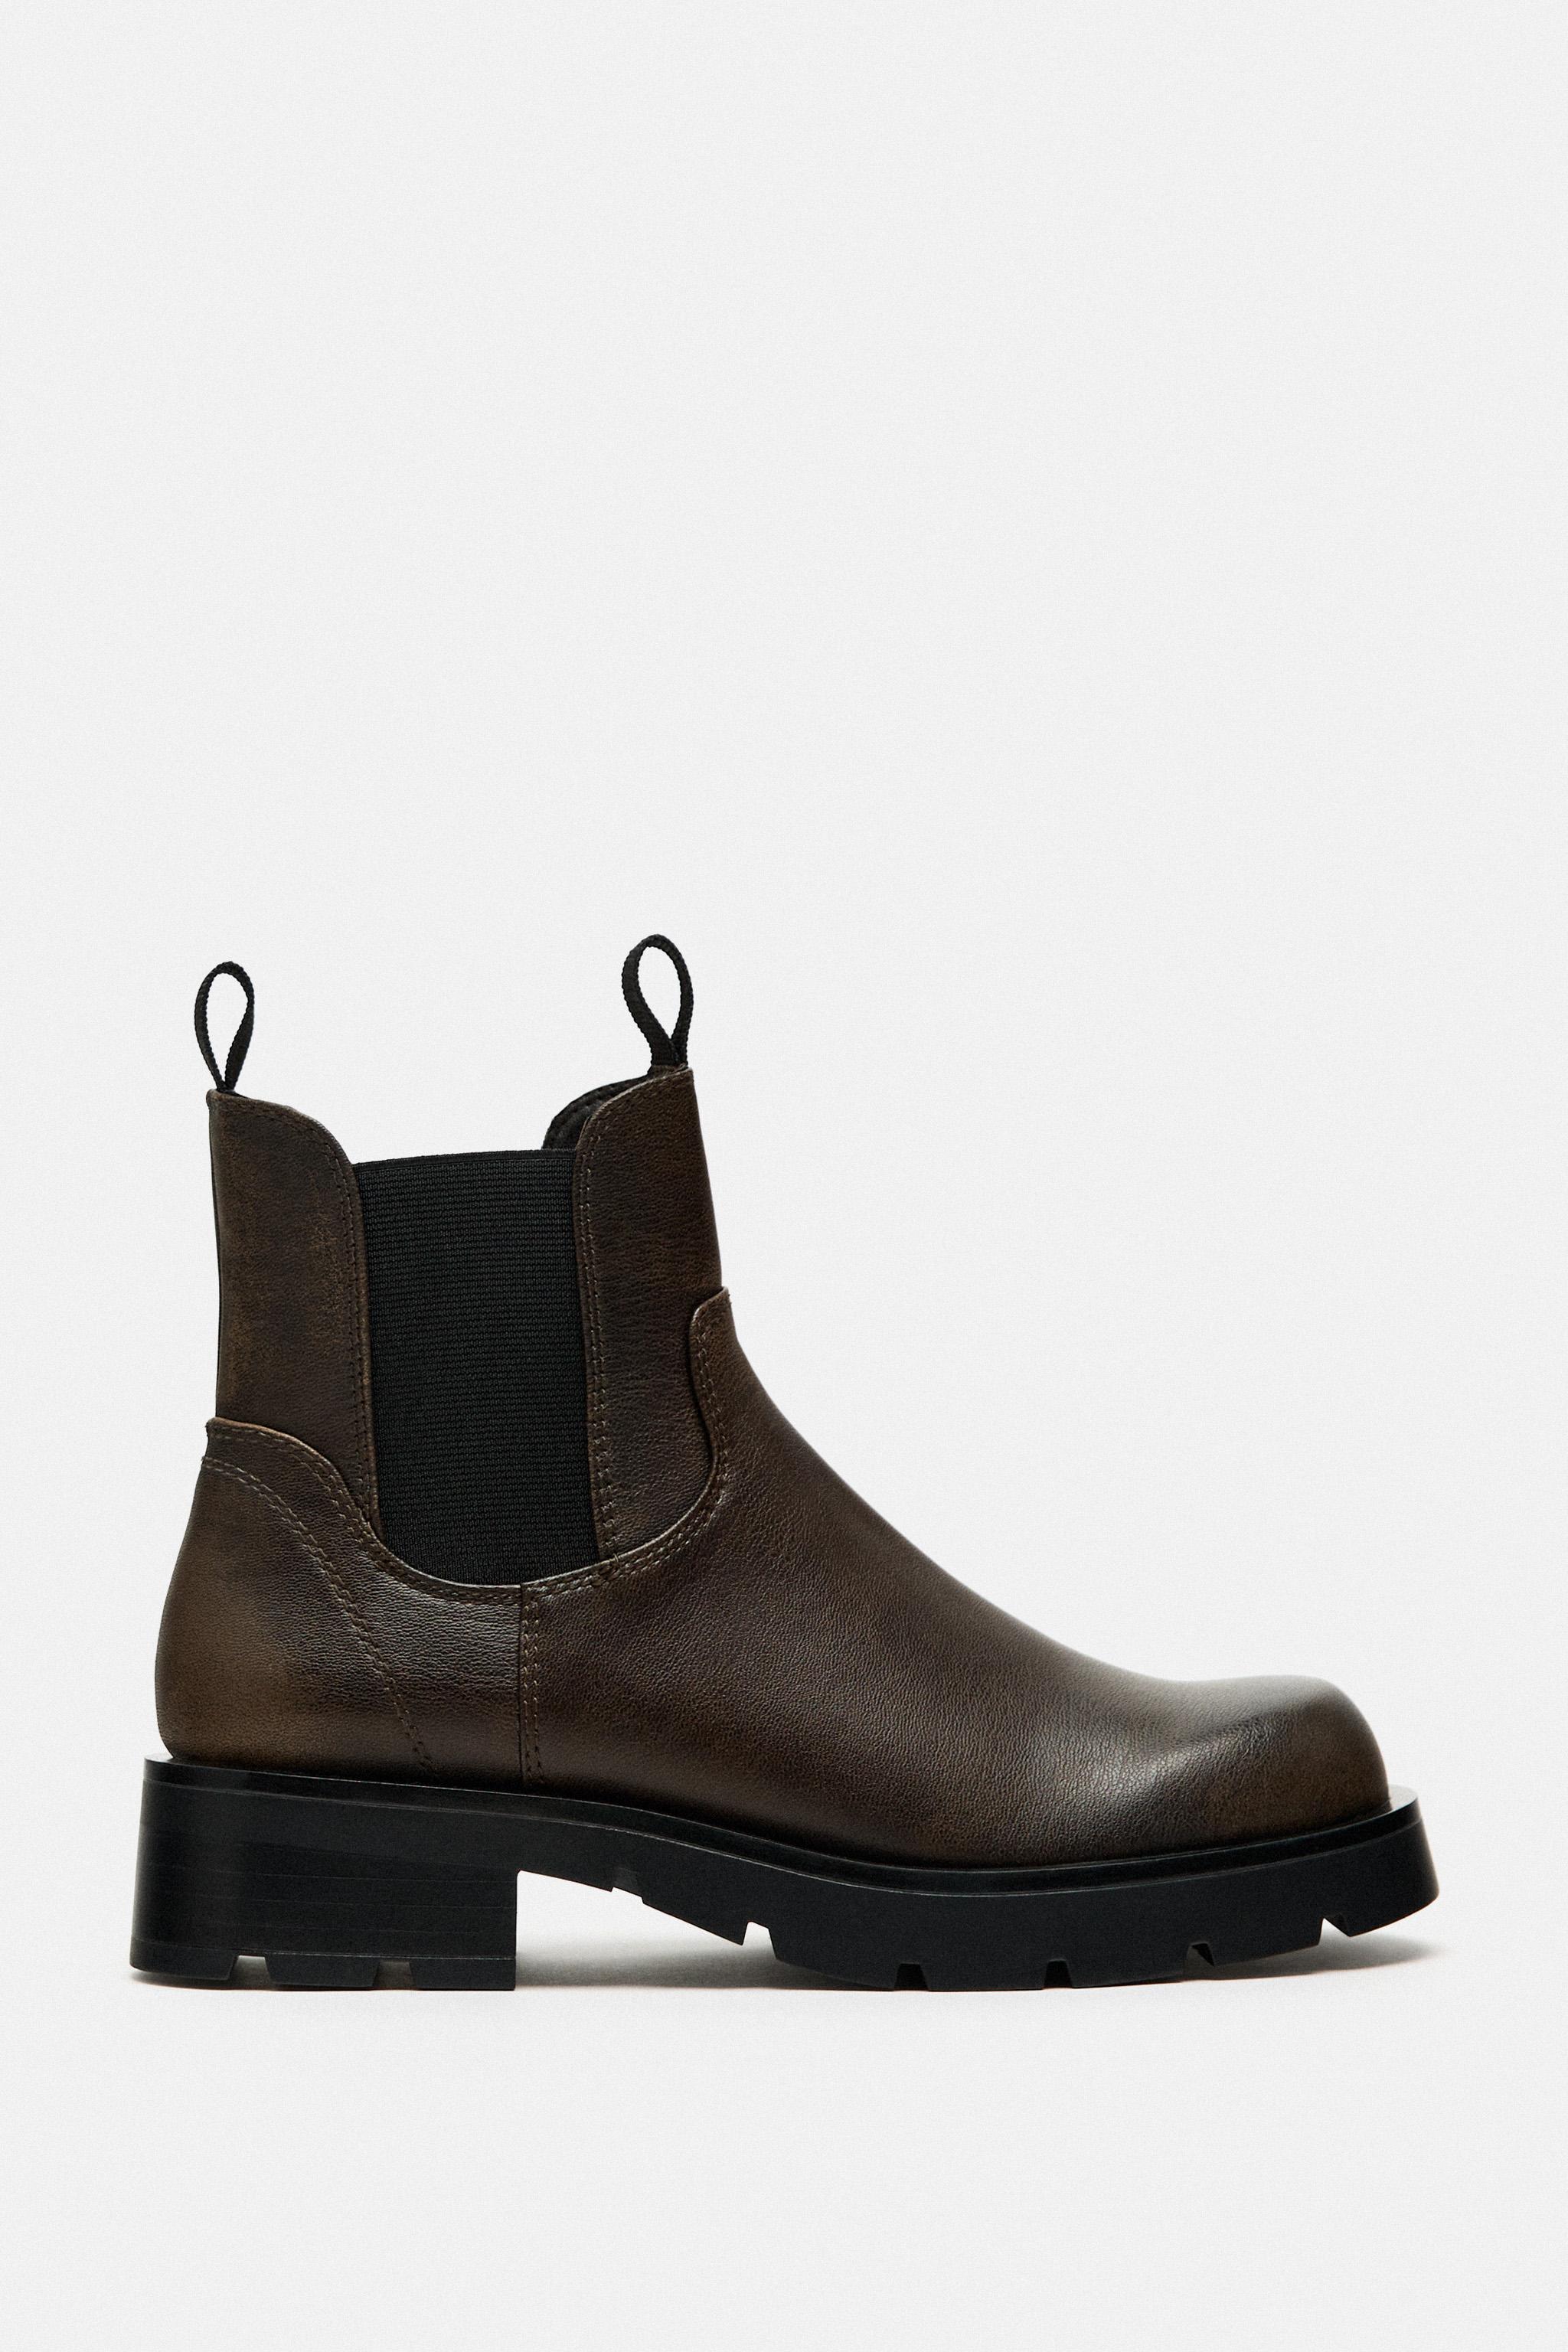 CHELSEA BOOTS - Brown | ZARA United States